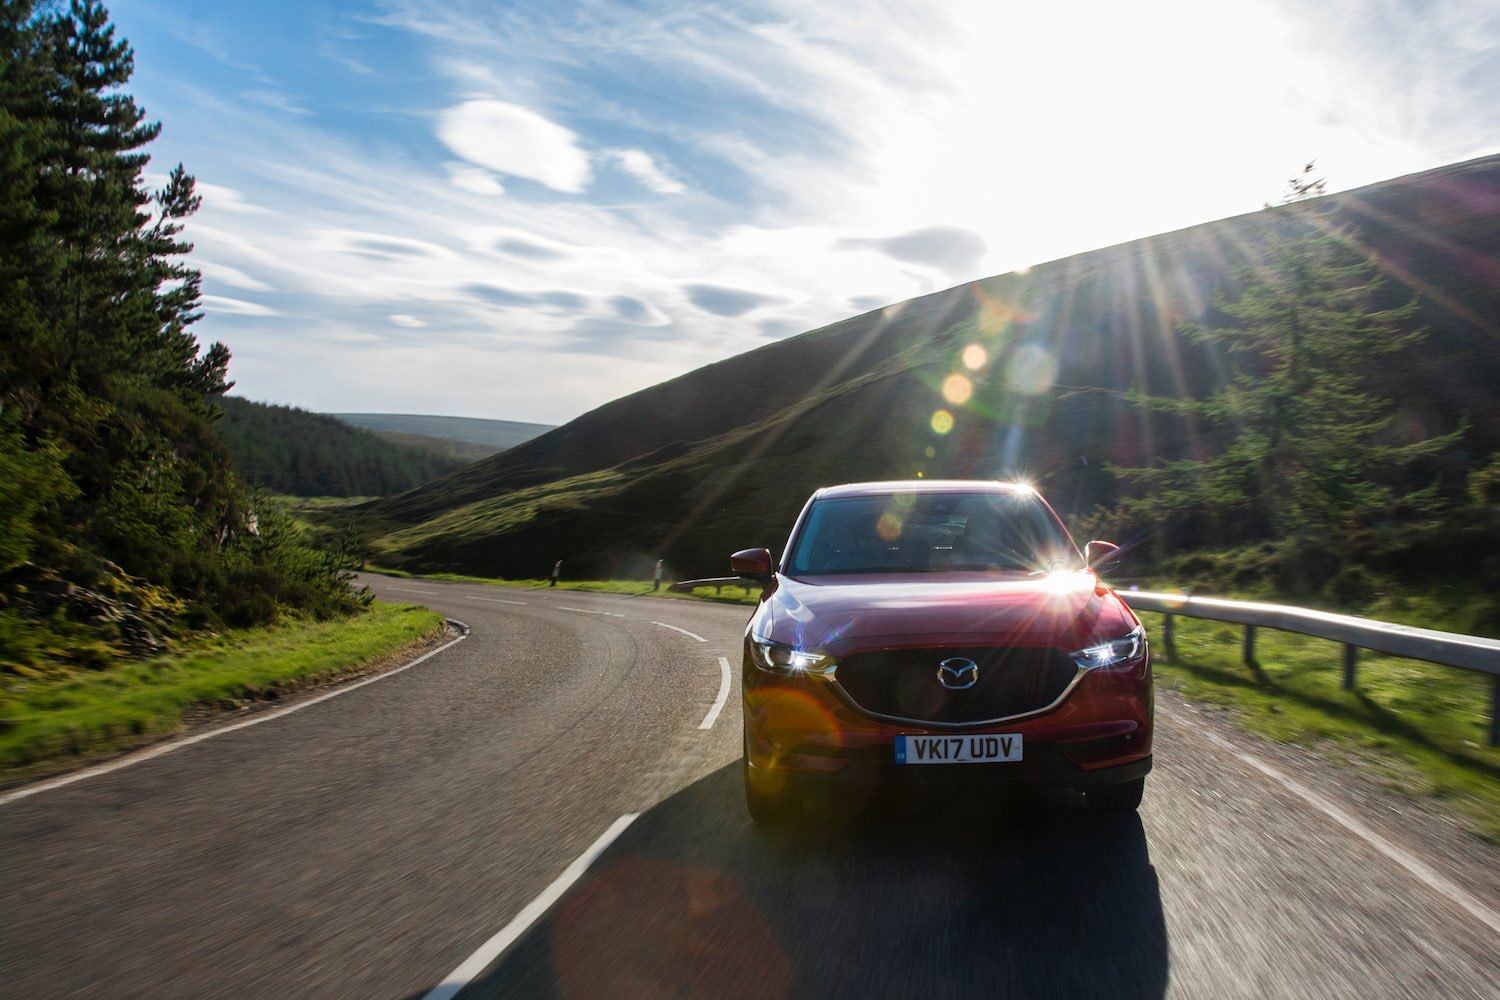 Tom Scanlan reviews the all new Mazda CX-5 in the Cairngorms Scotland for drive 14